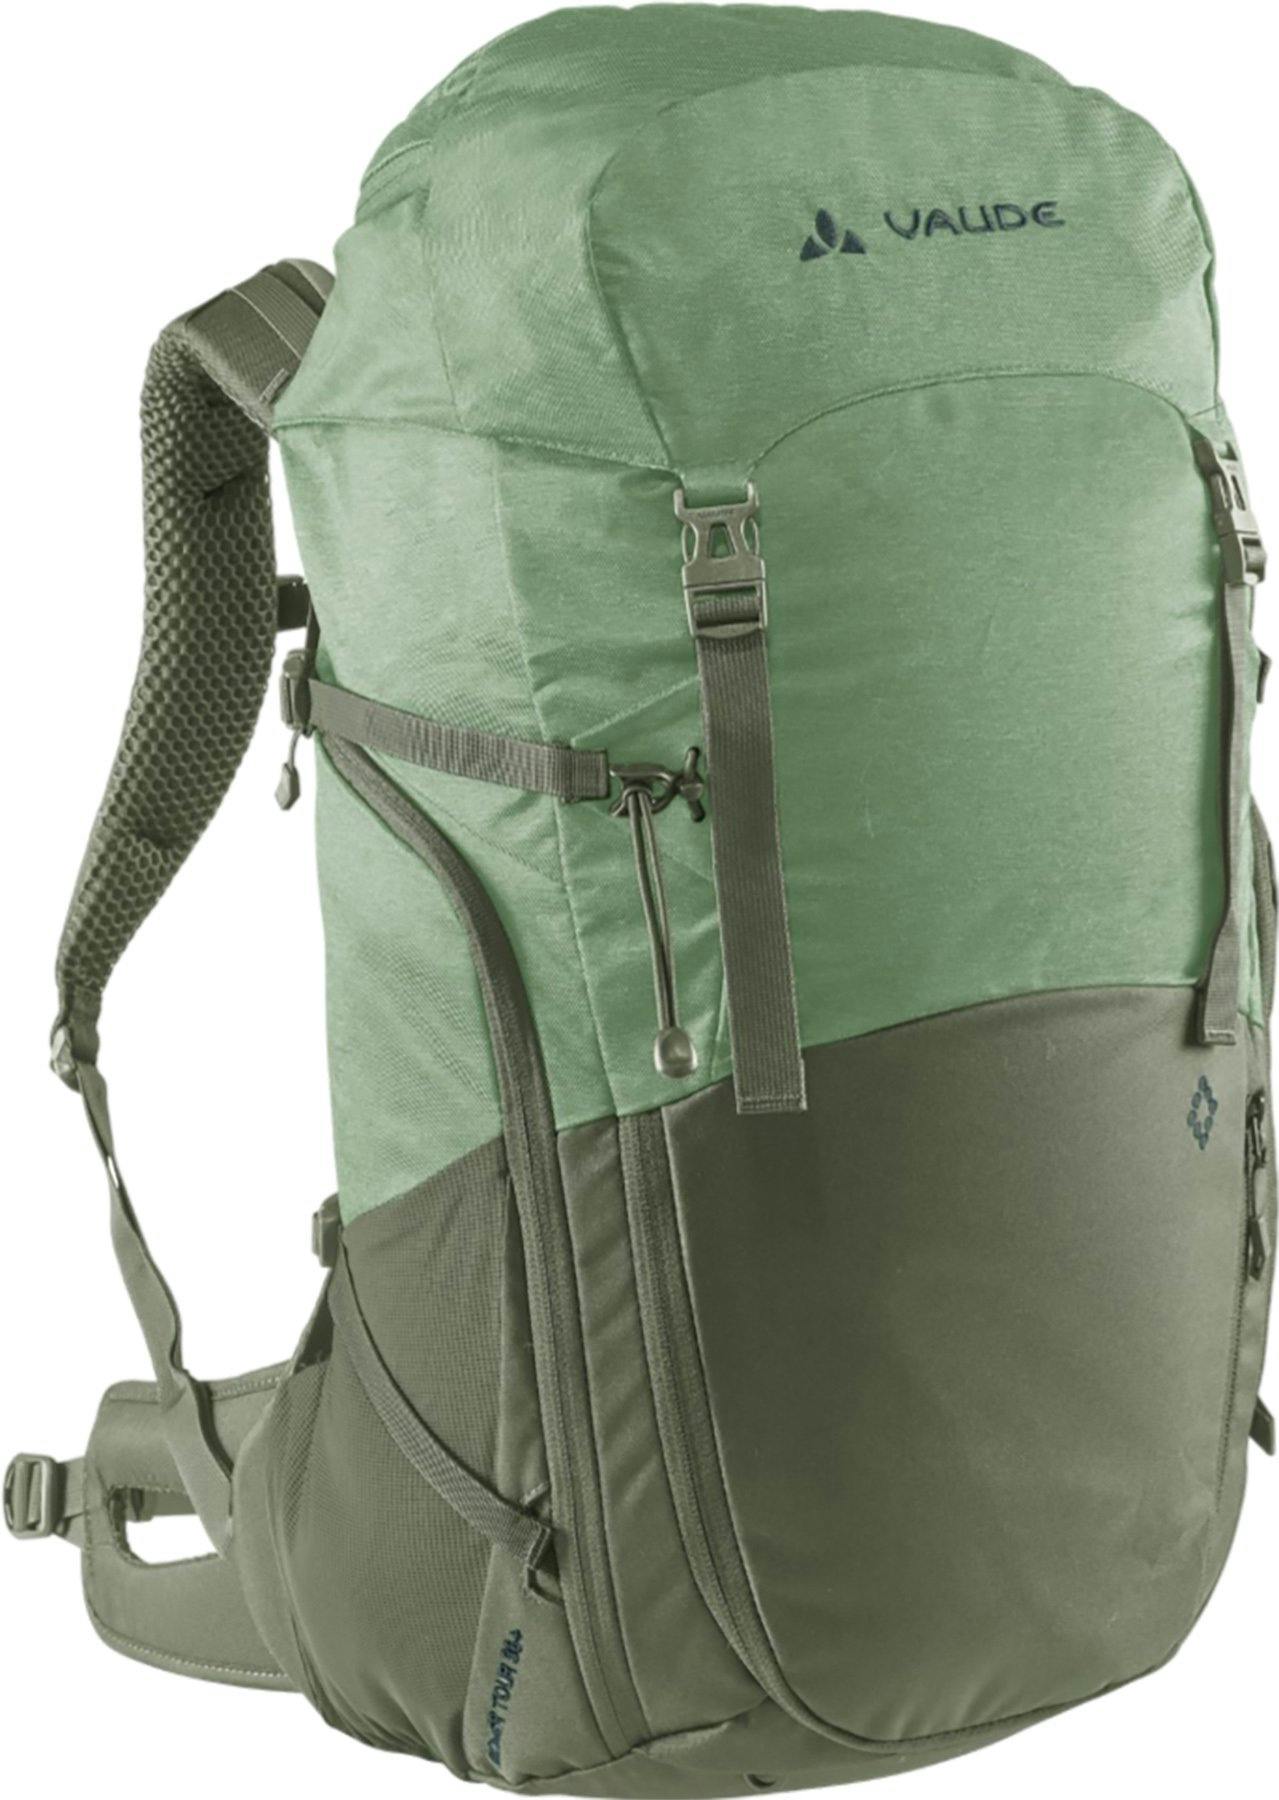 Product image for Skomer Tour Hiking Backpack 36+6L - Women's